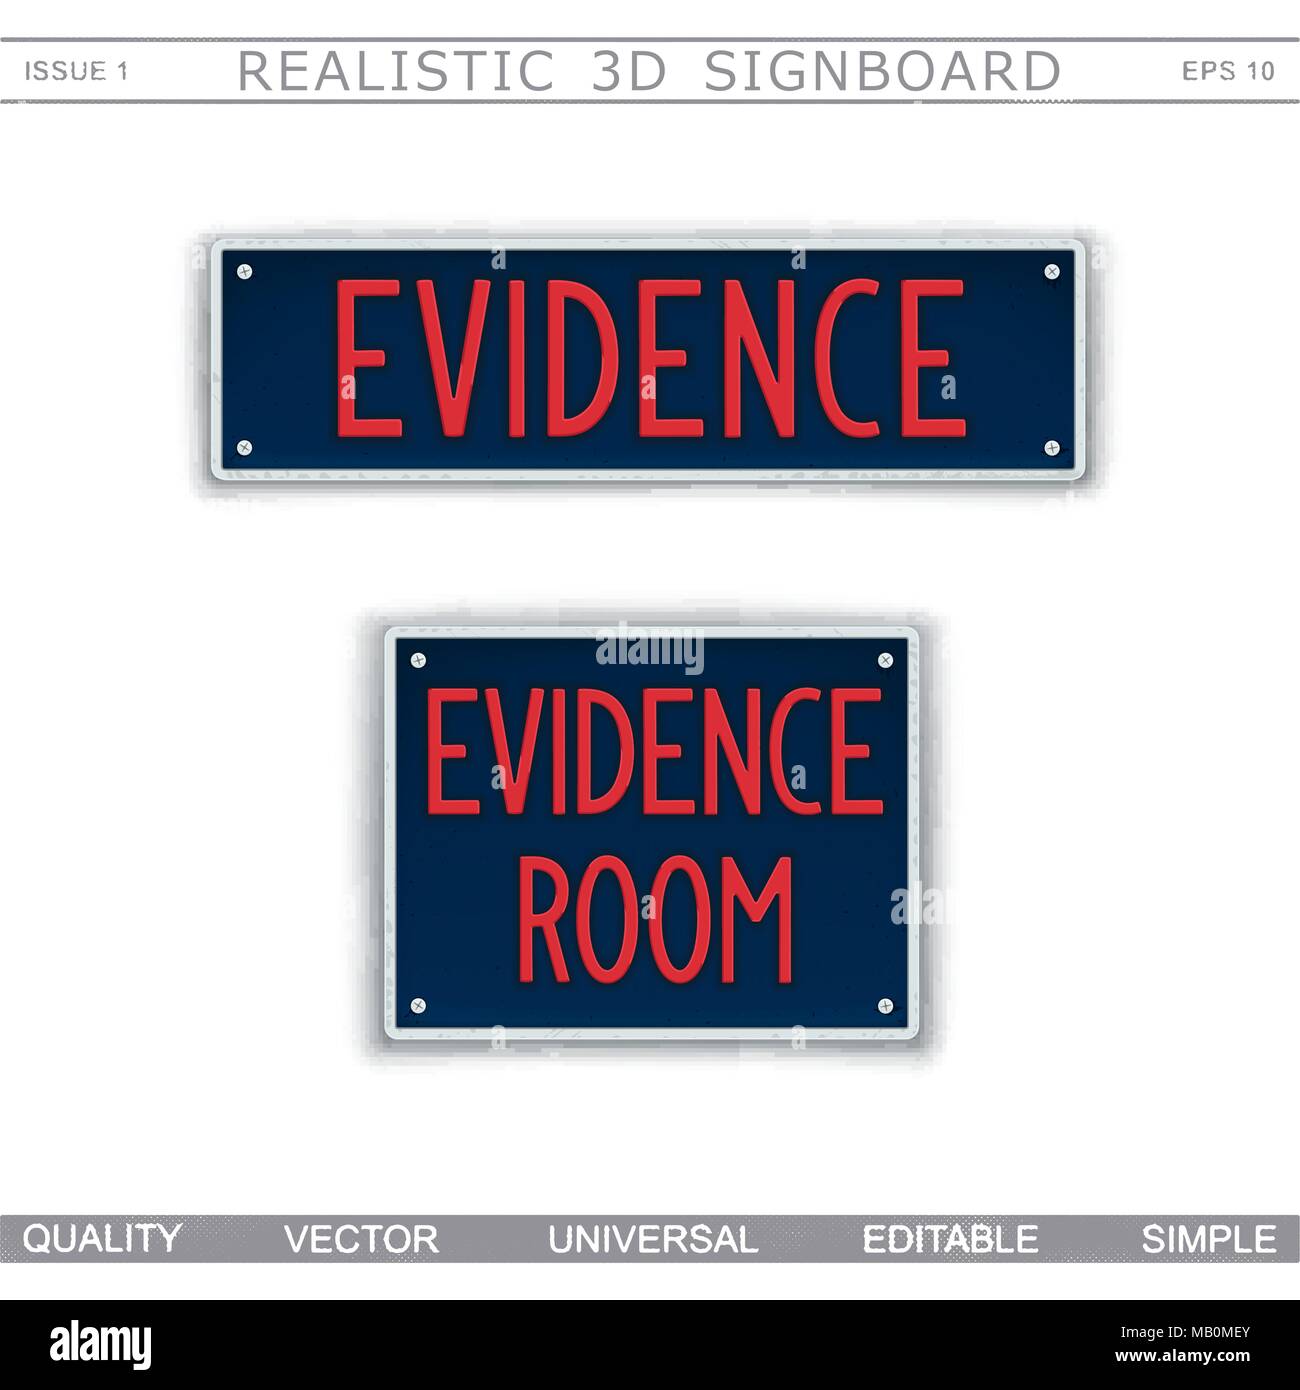 Signboard design. Evidence Room. Car license plate stylized. Vector elements Stock Vector